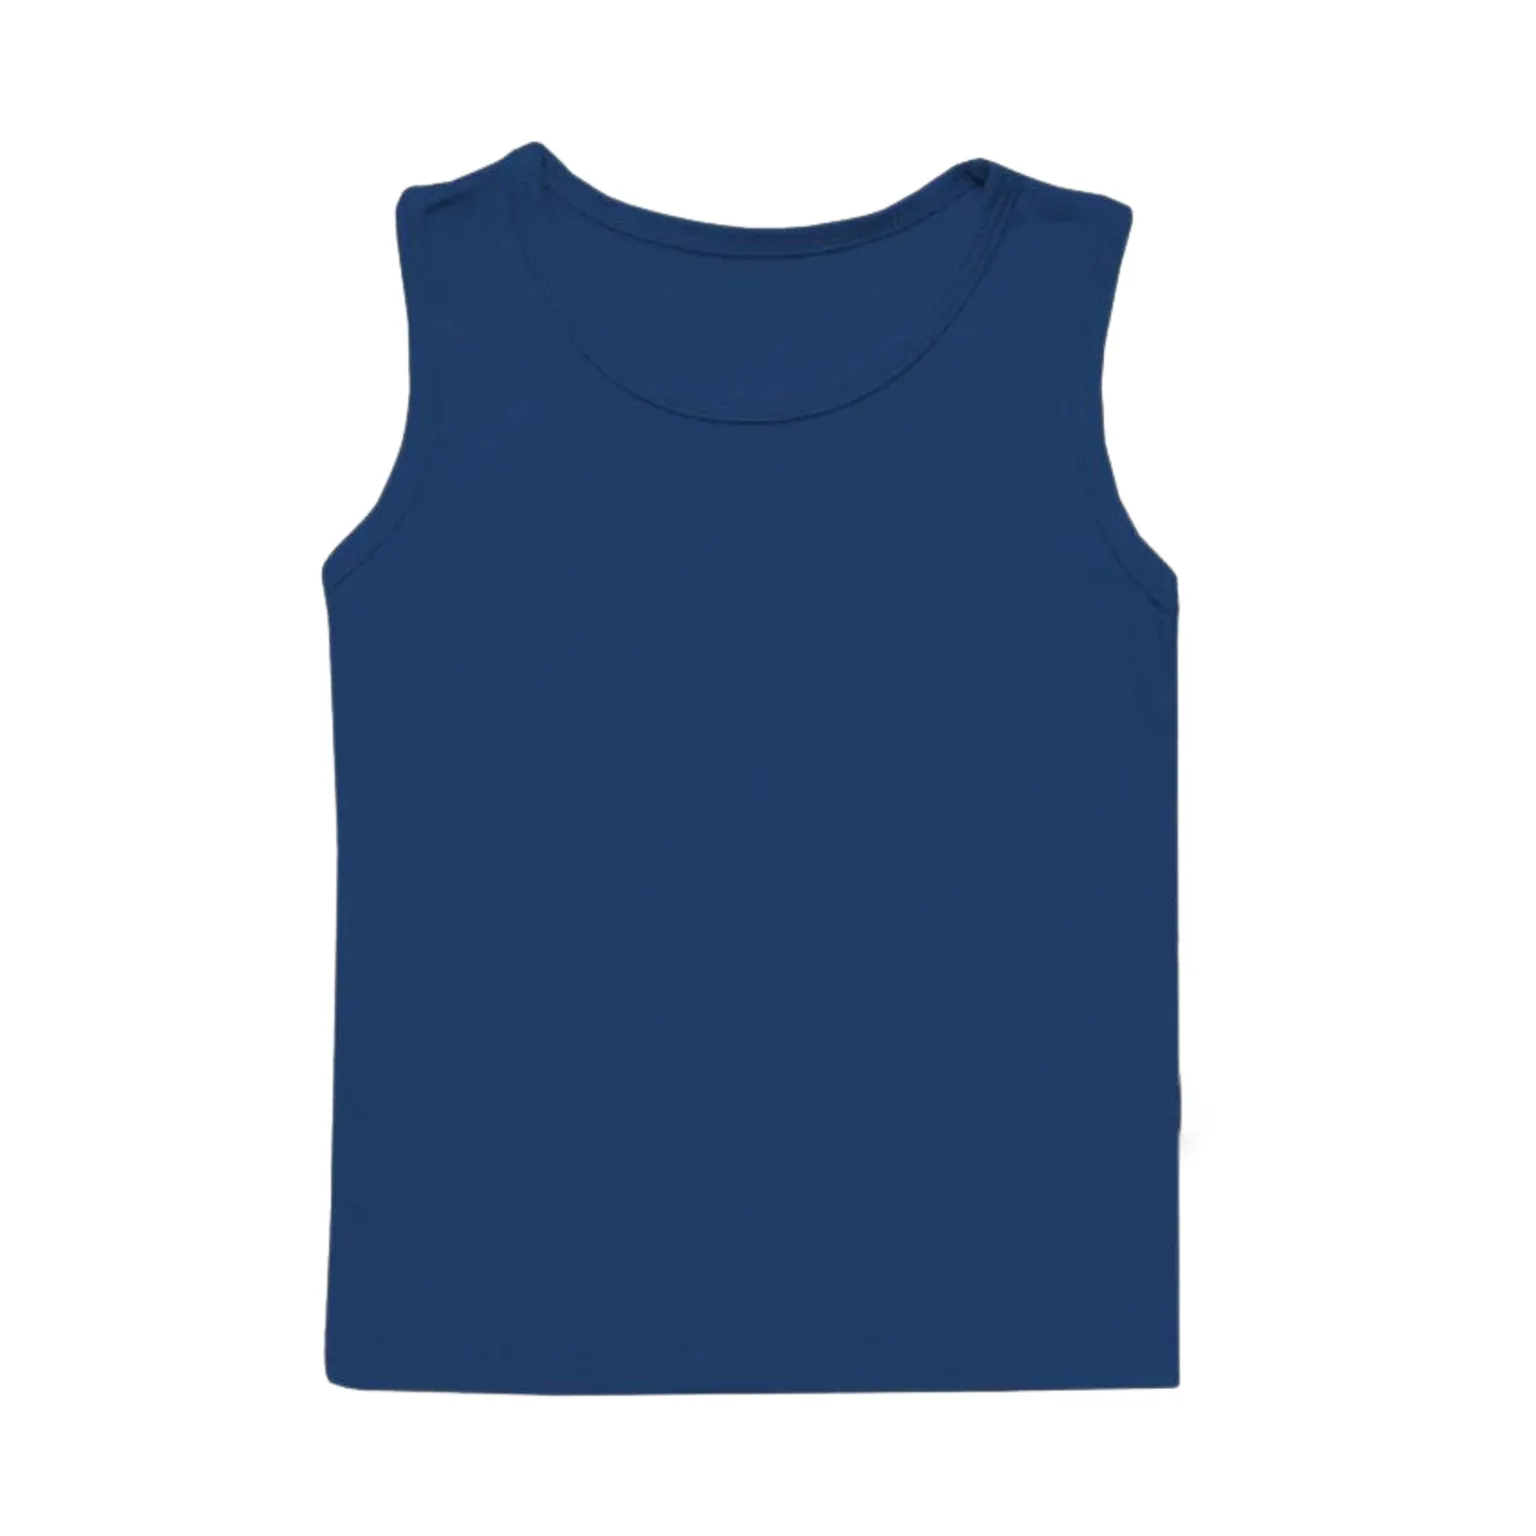 Manufacturing with recycled materials for Tank Top For Boy.